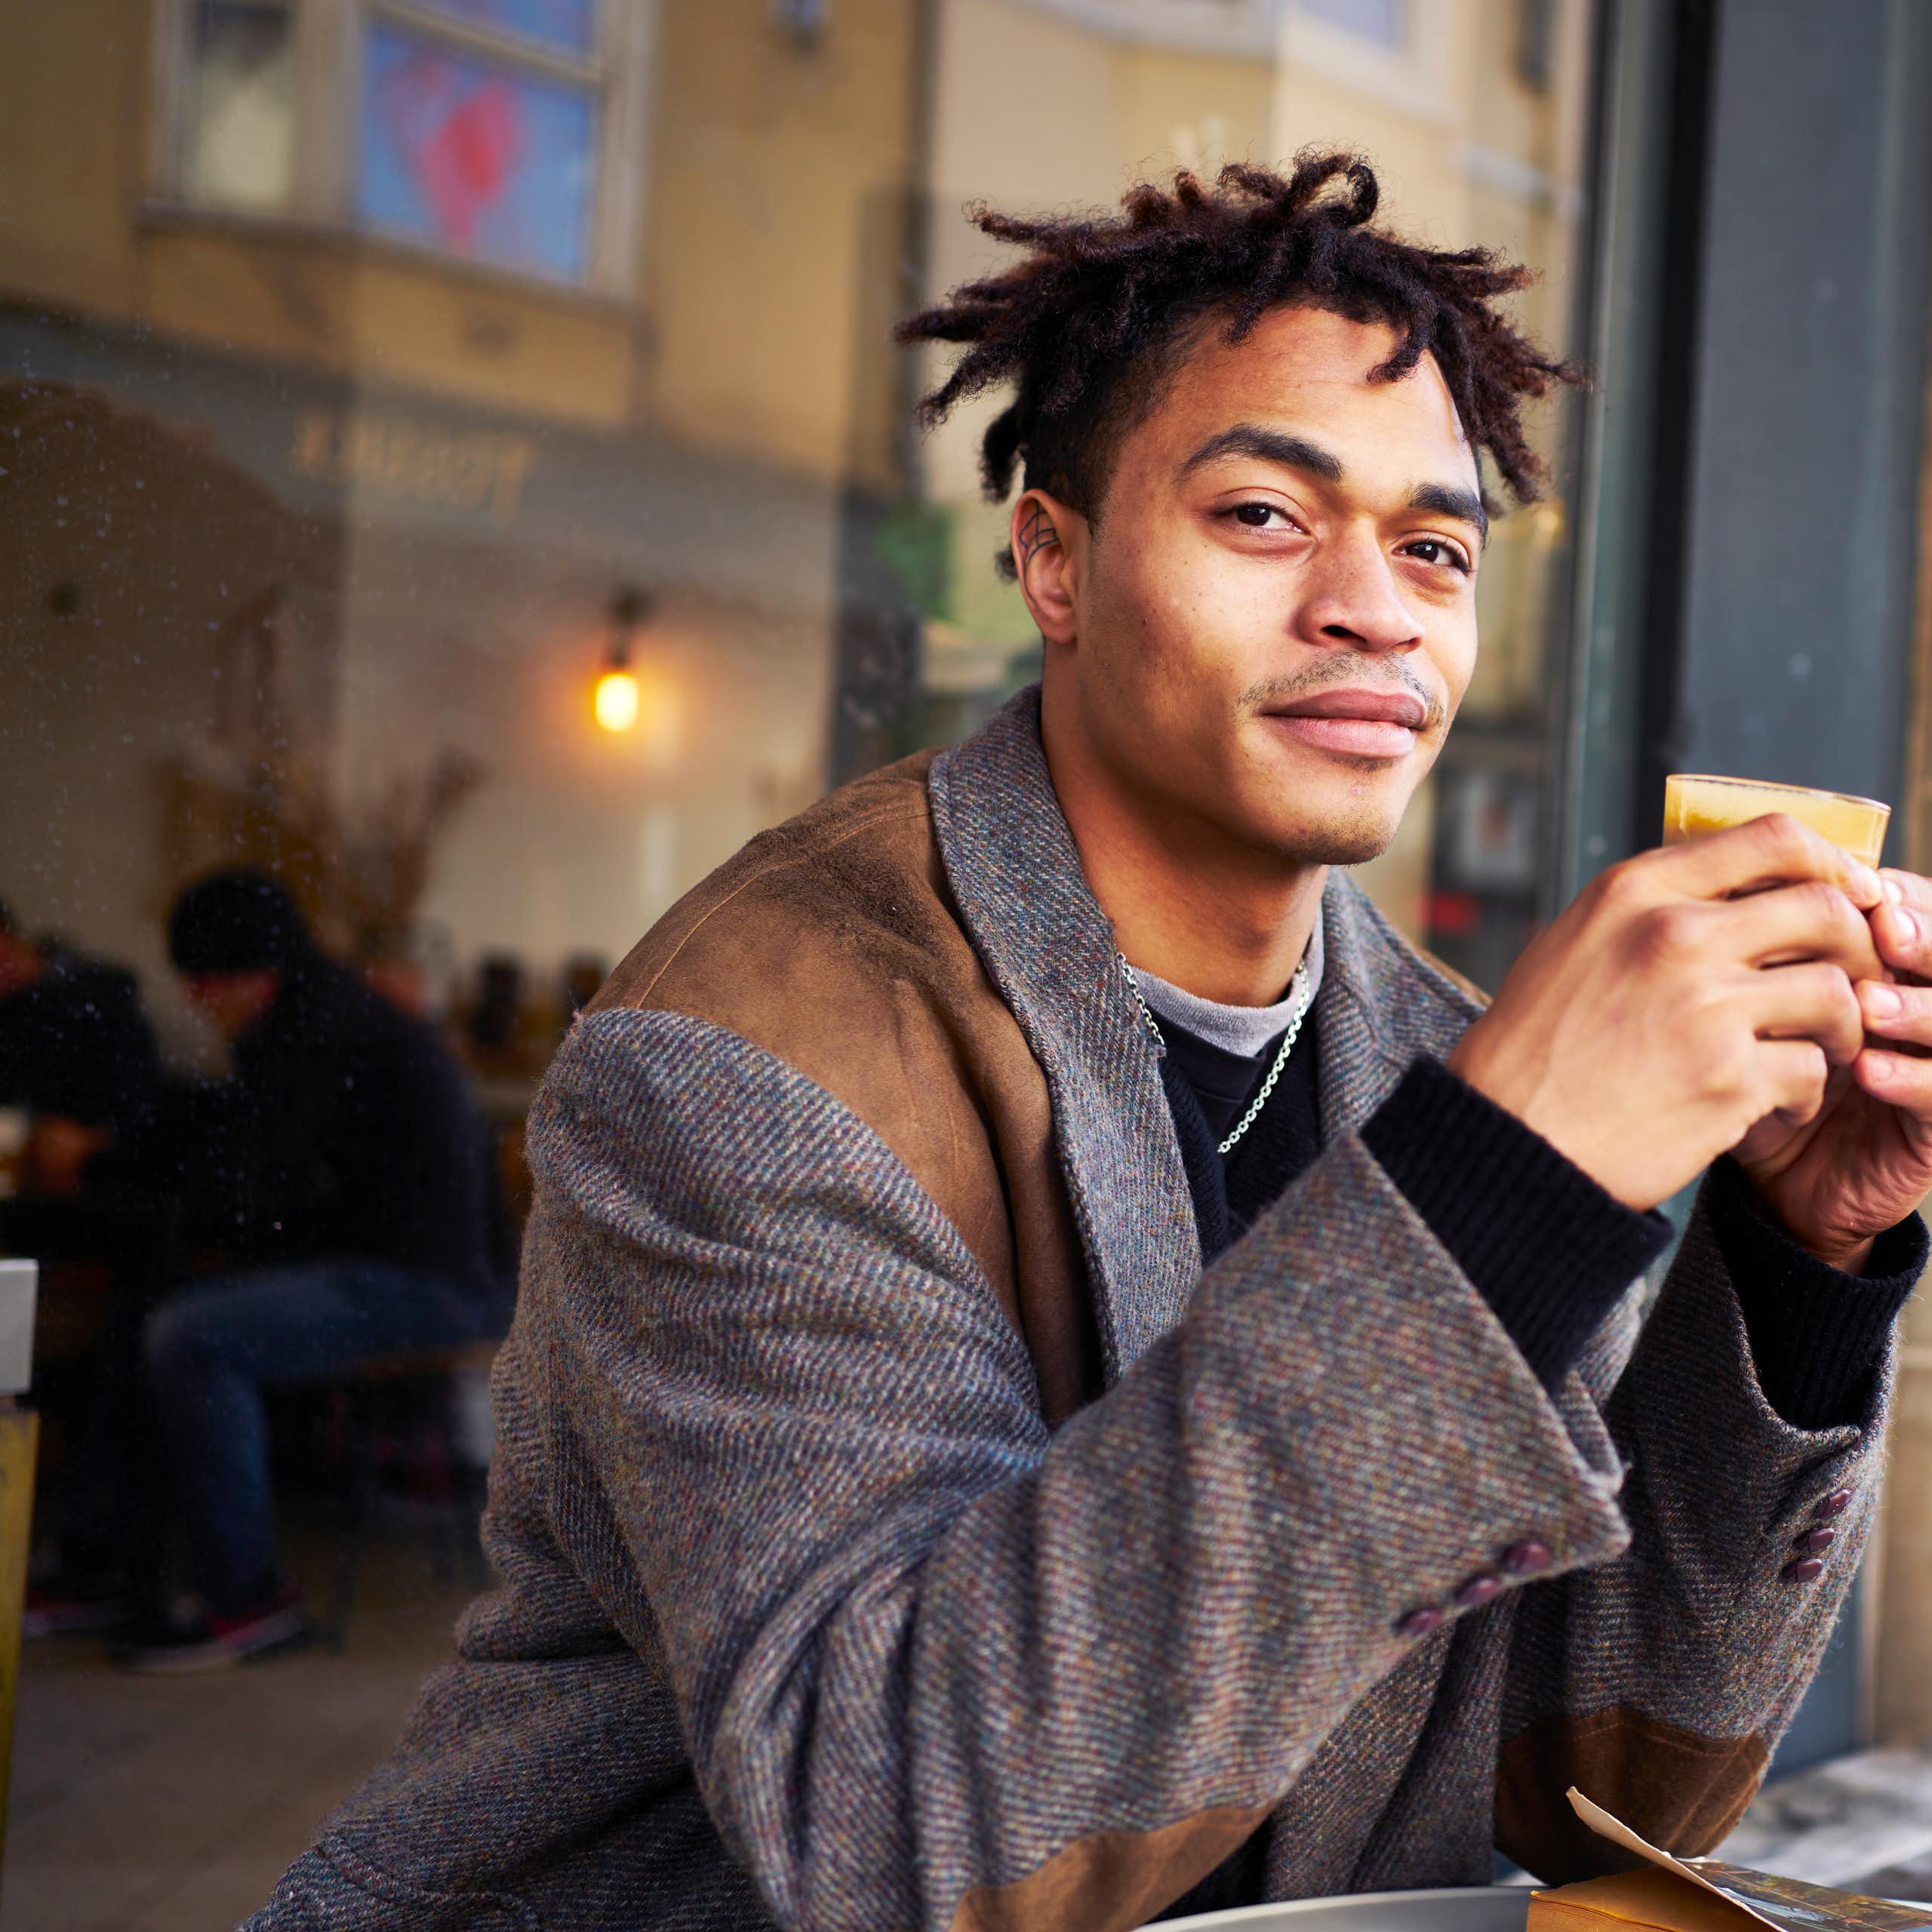 Fashionable young man drinking coffee at a cafe outdoors.